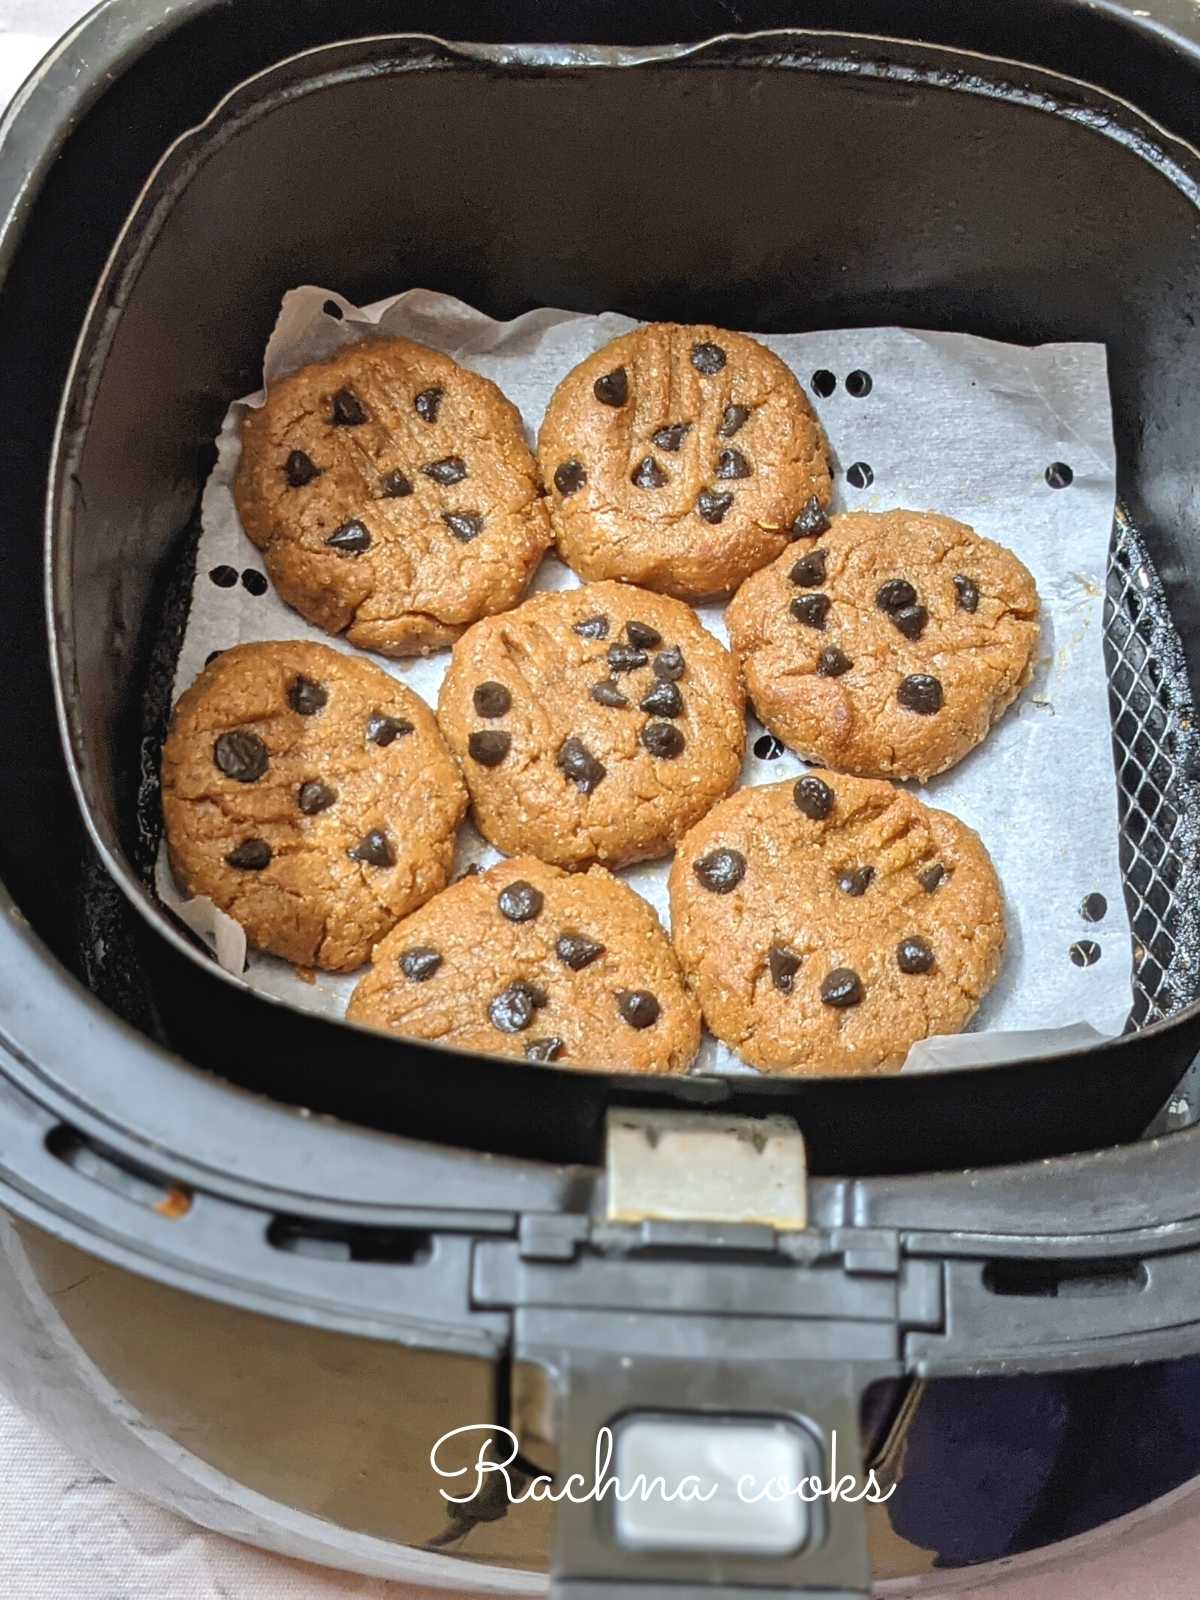 Peanut butter cookies arranged on parchment paper in air fryer basket.